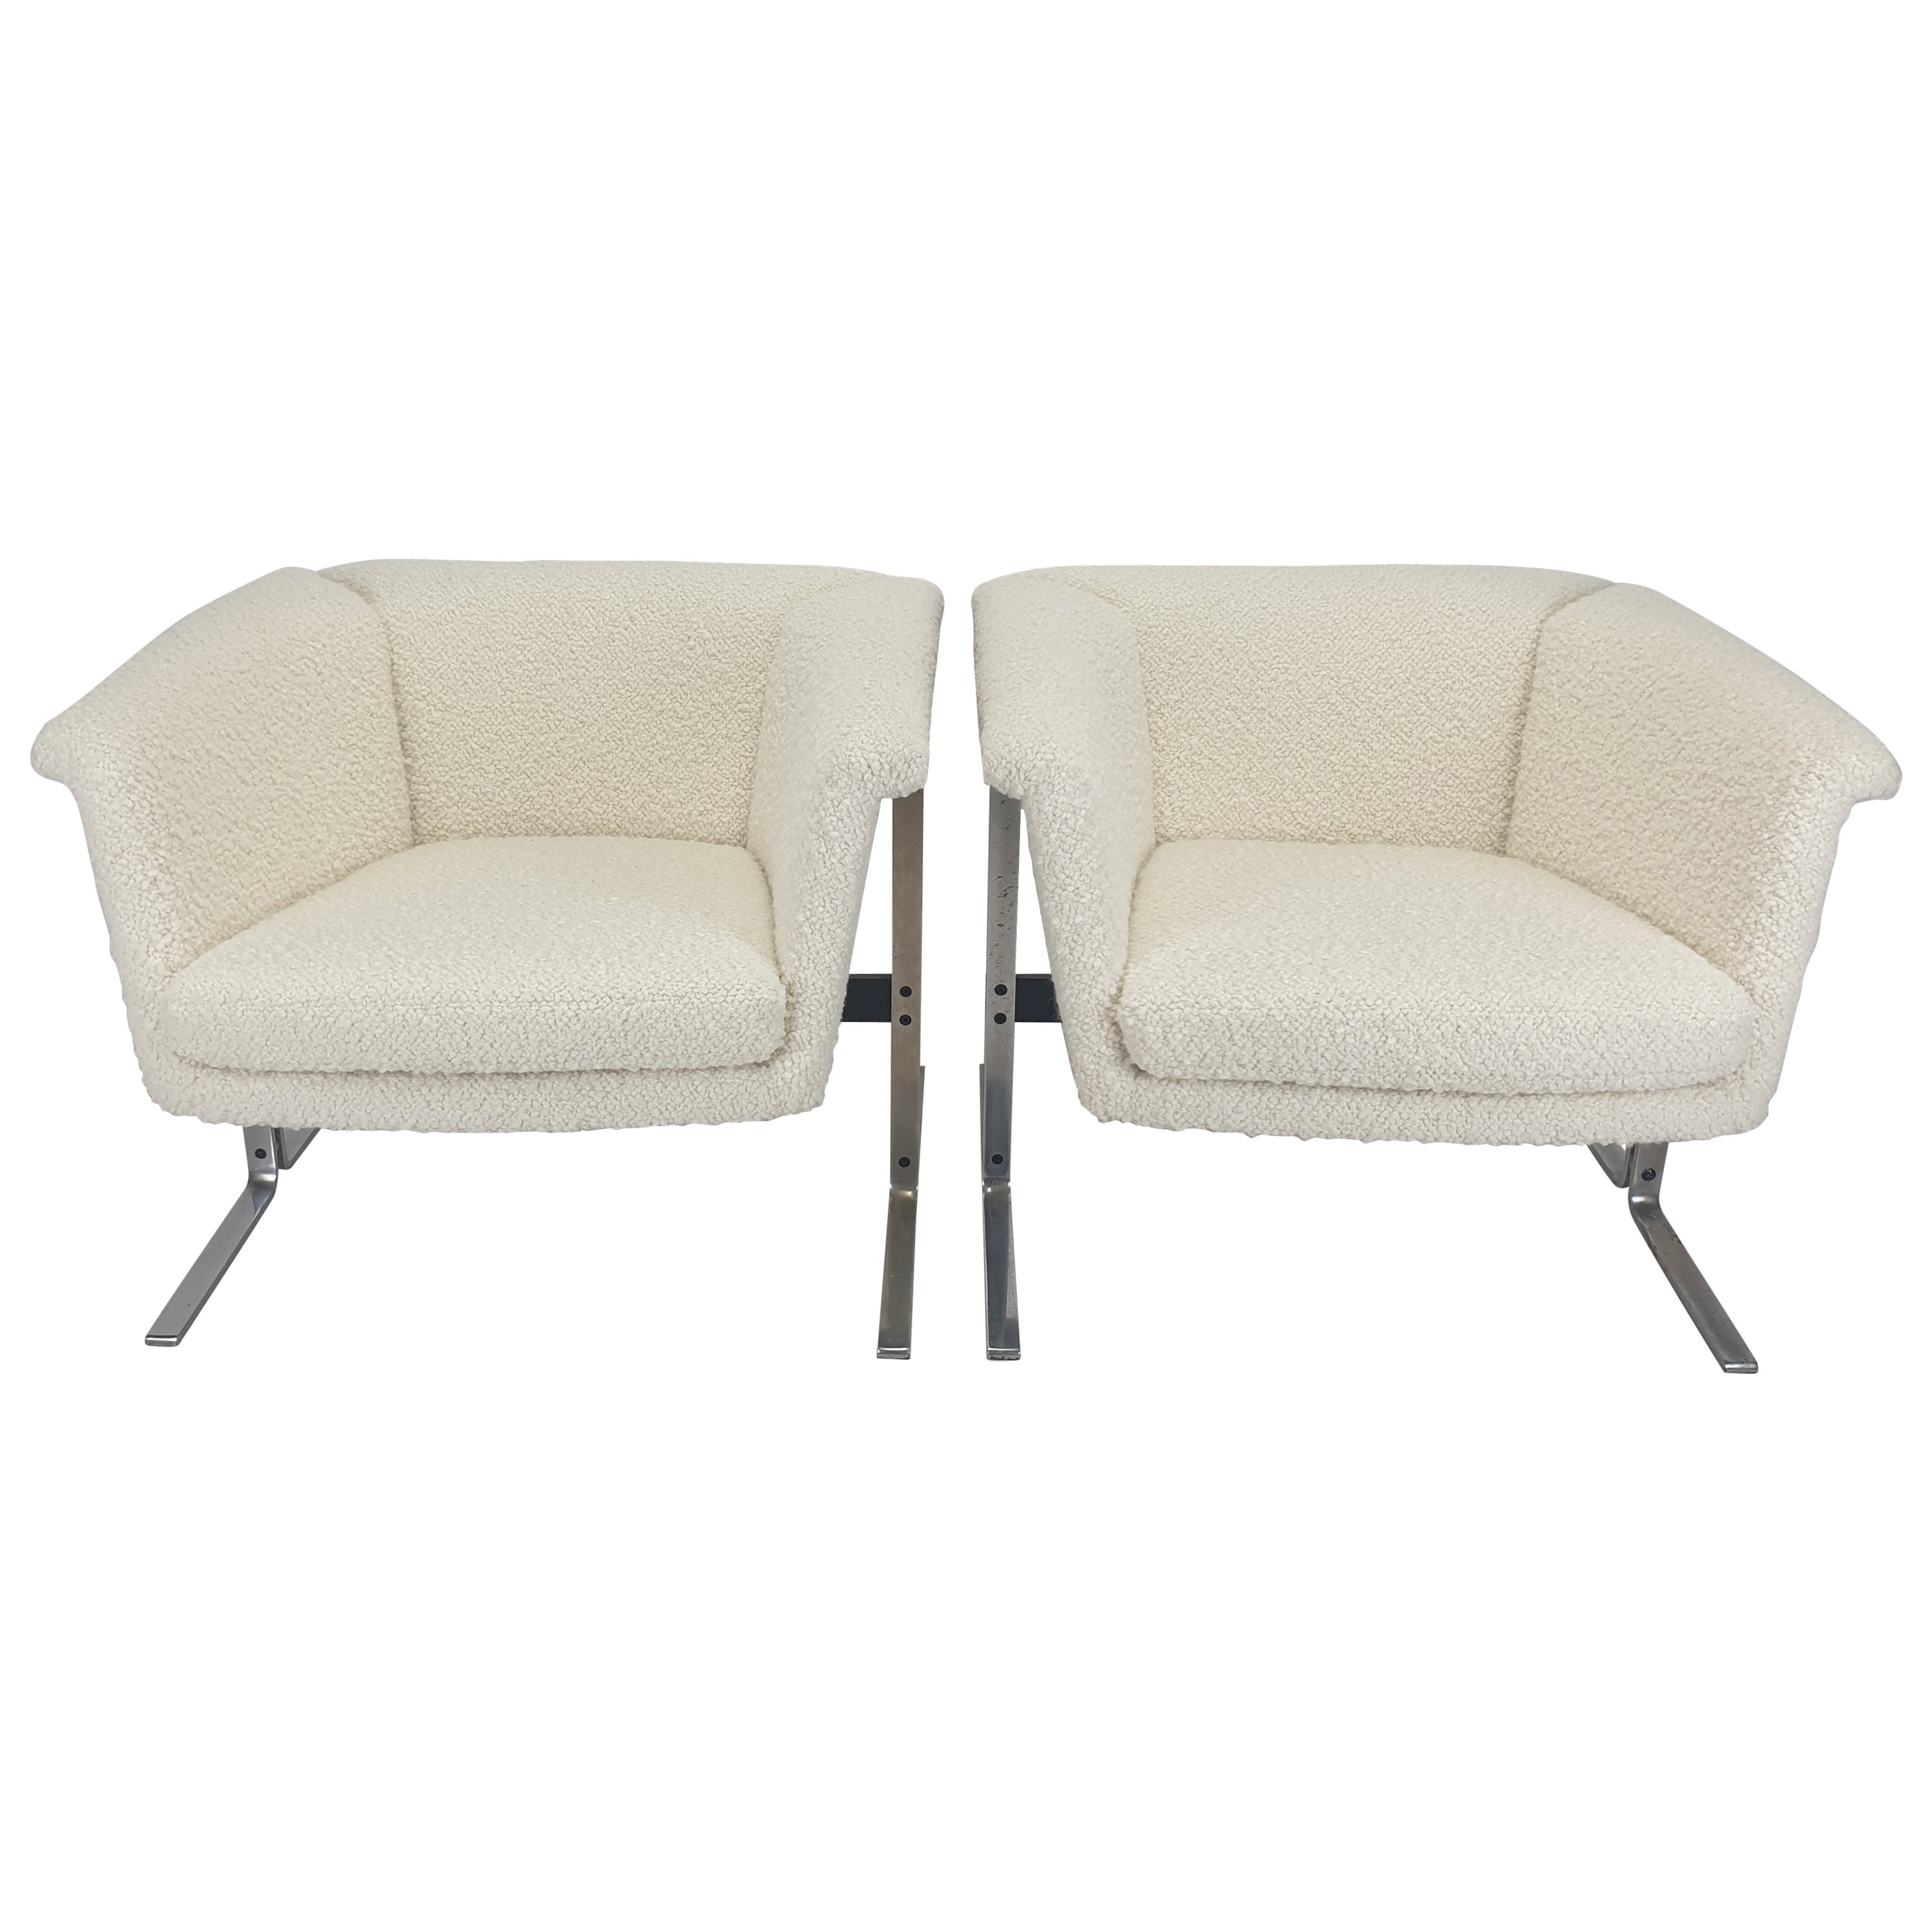 Set of 042 Lounge Chairs by Geoffrey Harcourt for Artifort, 1963 For Sale